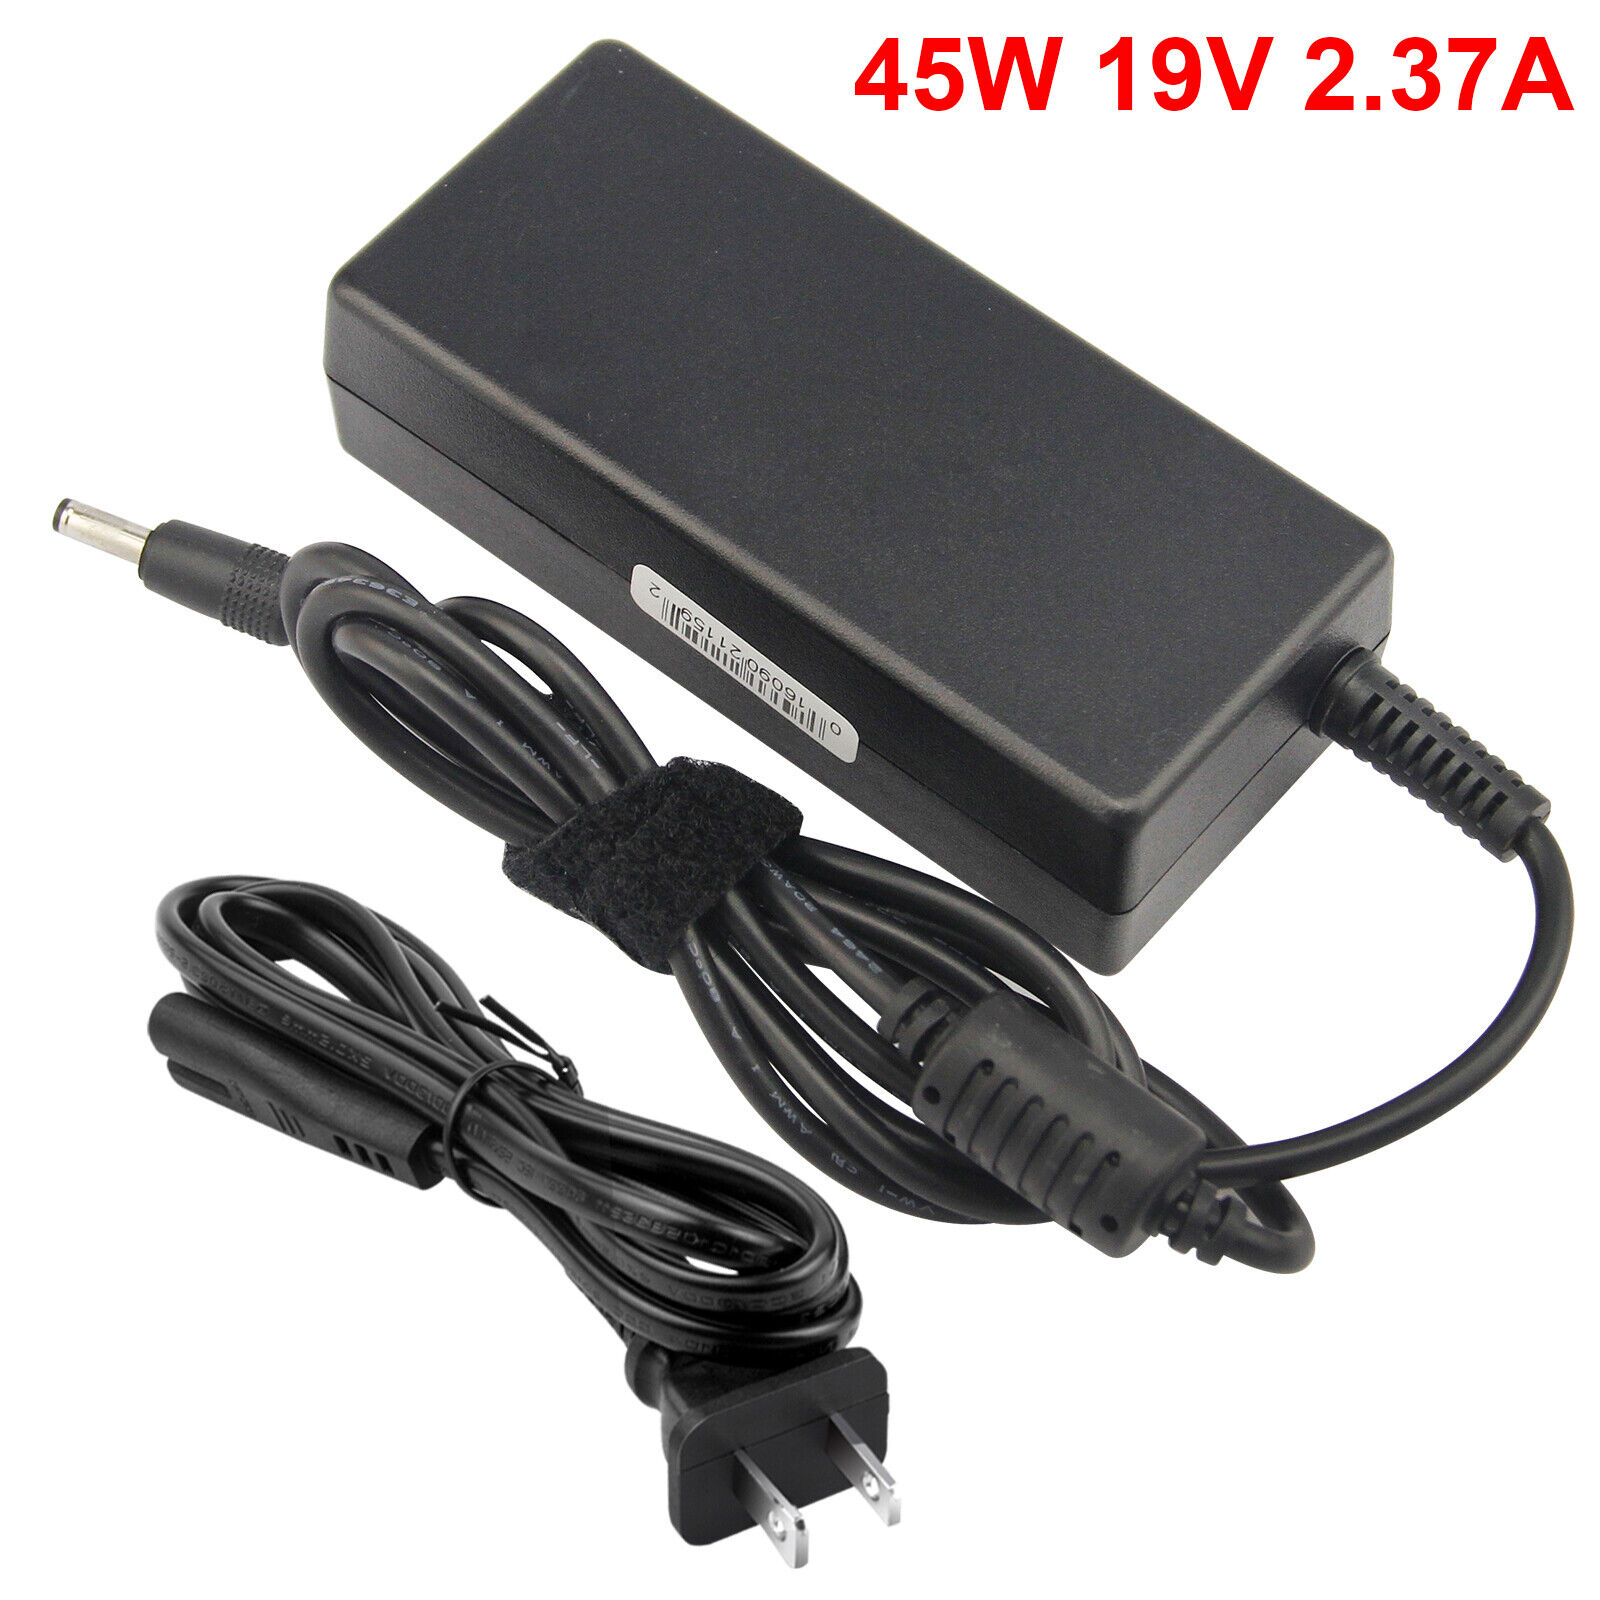 65W 45W AC Adapter Charger For ASUS Zenbook X553 X553S X553SA X553M X553MA X540S